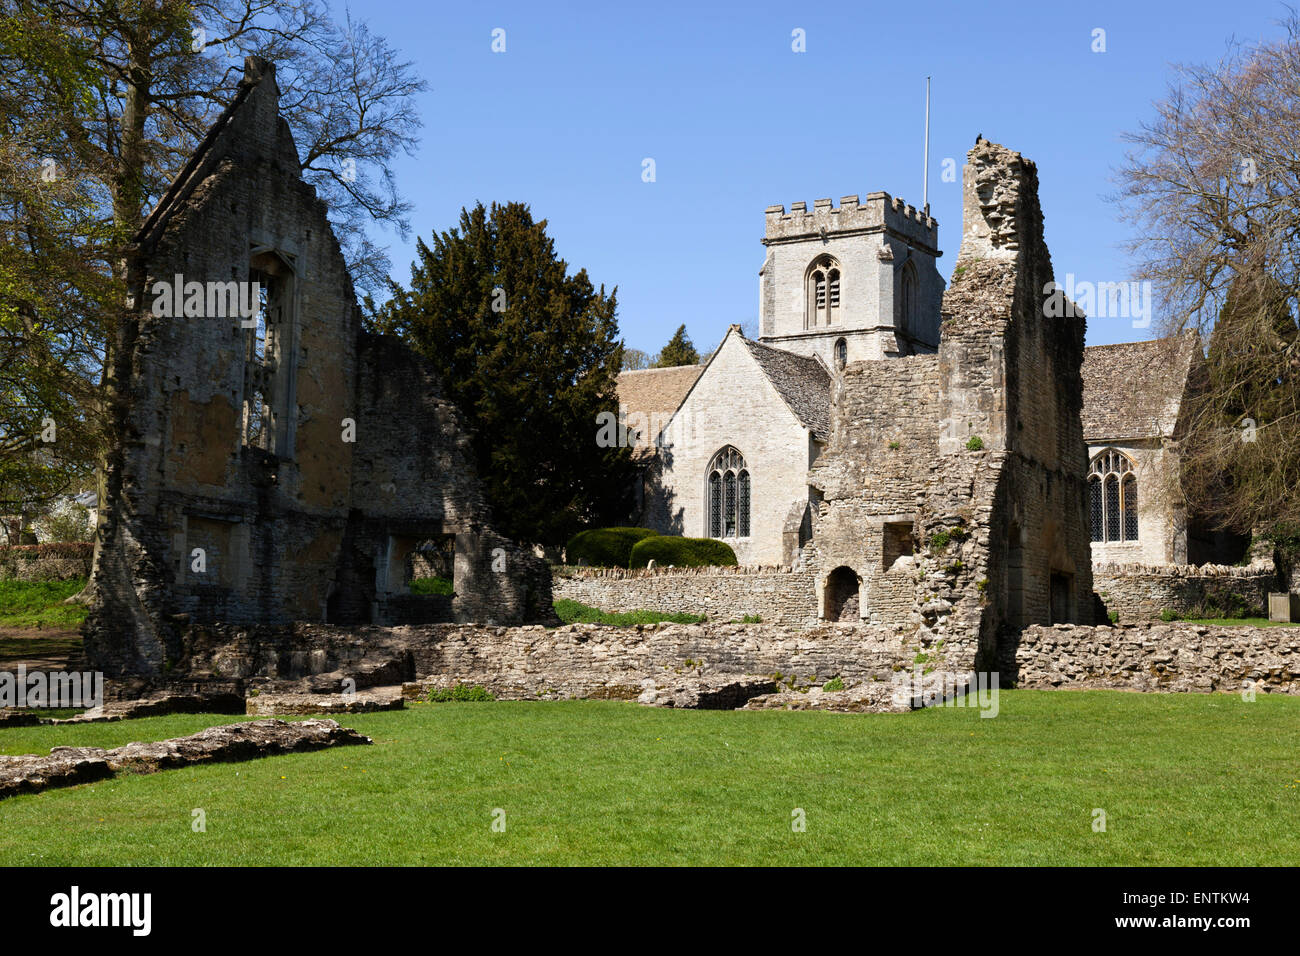 Ruins of Minster Lovell Hall (built in the 1440's), Minster Lovell, near Witney, Cotswolds, Oxfordshire, England, United Kingdom Stock Photo